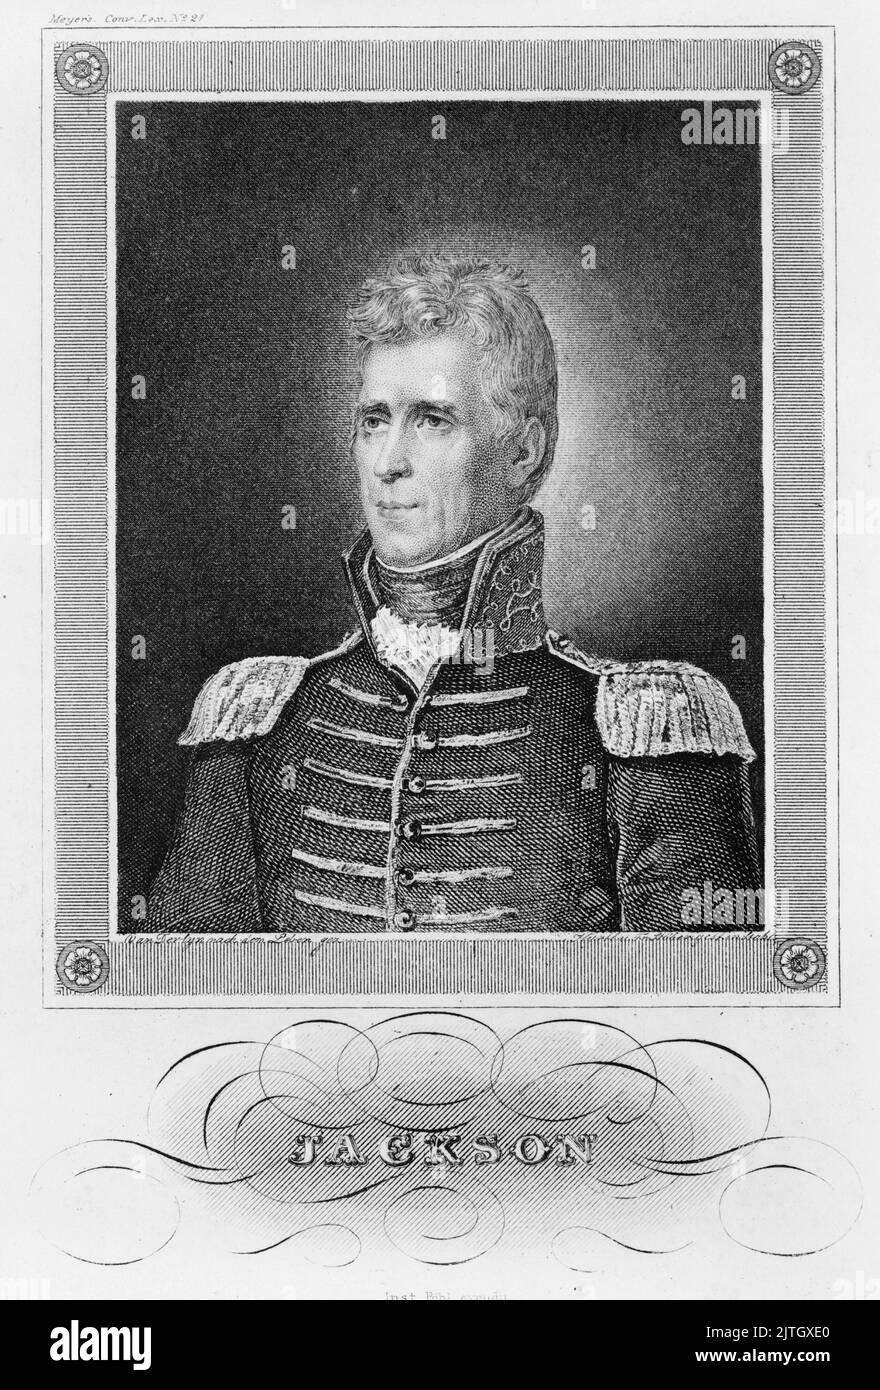 An engraving by Andrew Jackson, who was the seventh president of the USA. Stock Photo